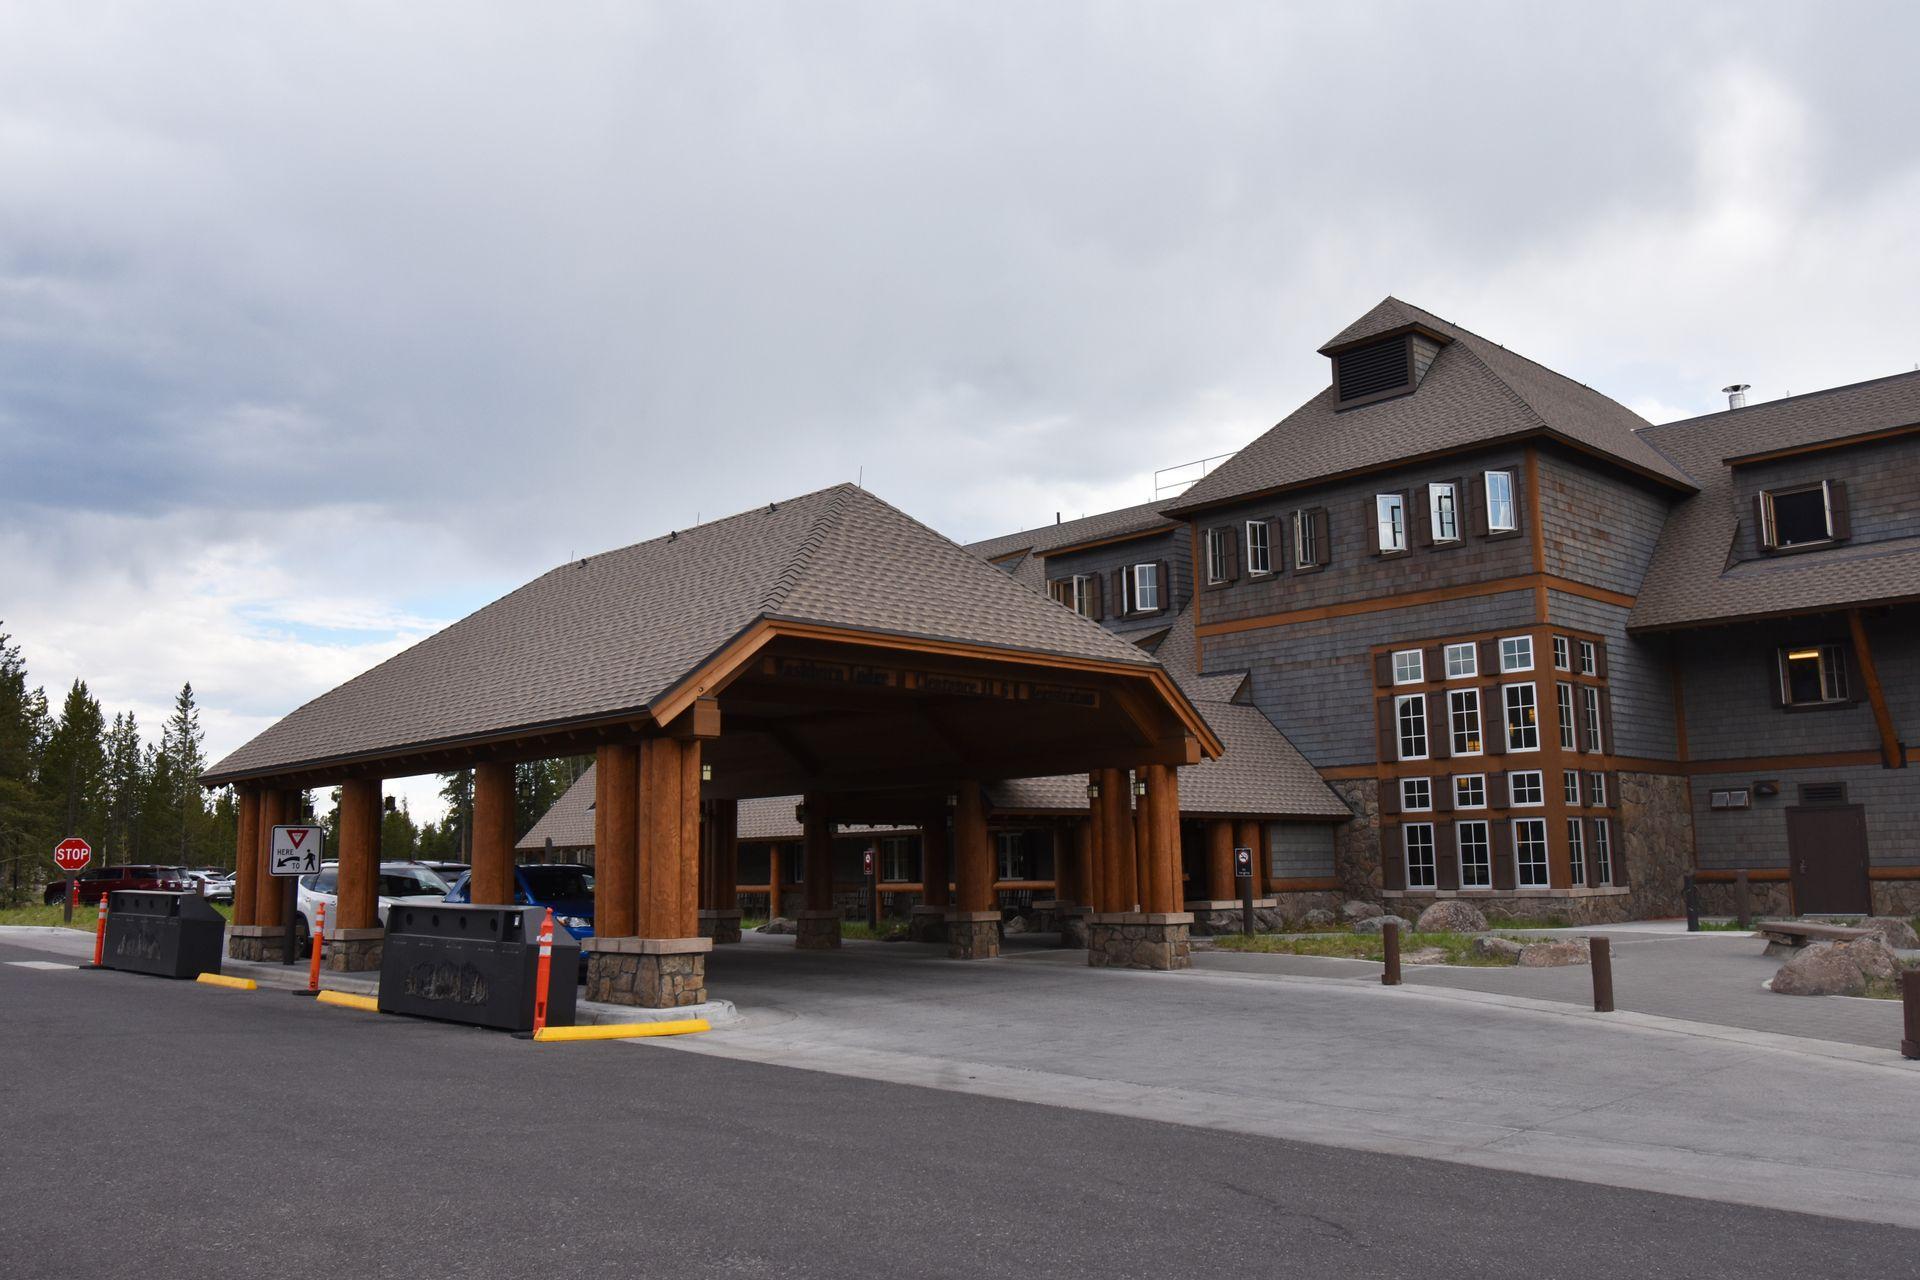 The exterior of one of the buildings that make up Canyon Lodge.